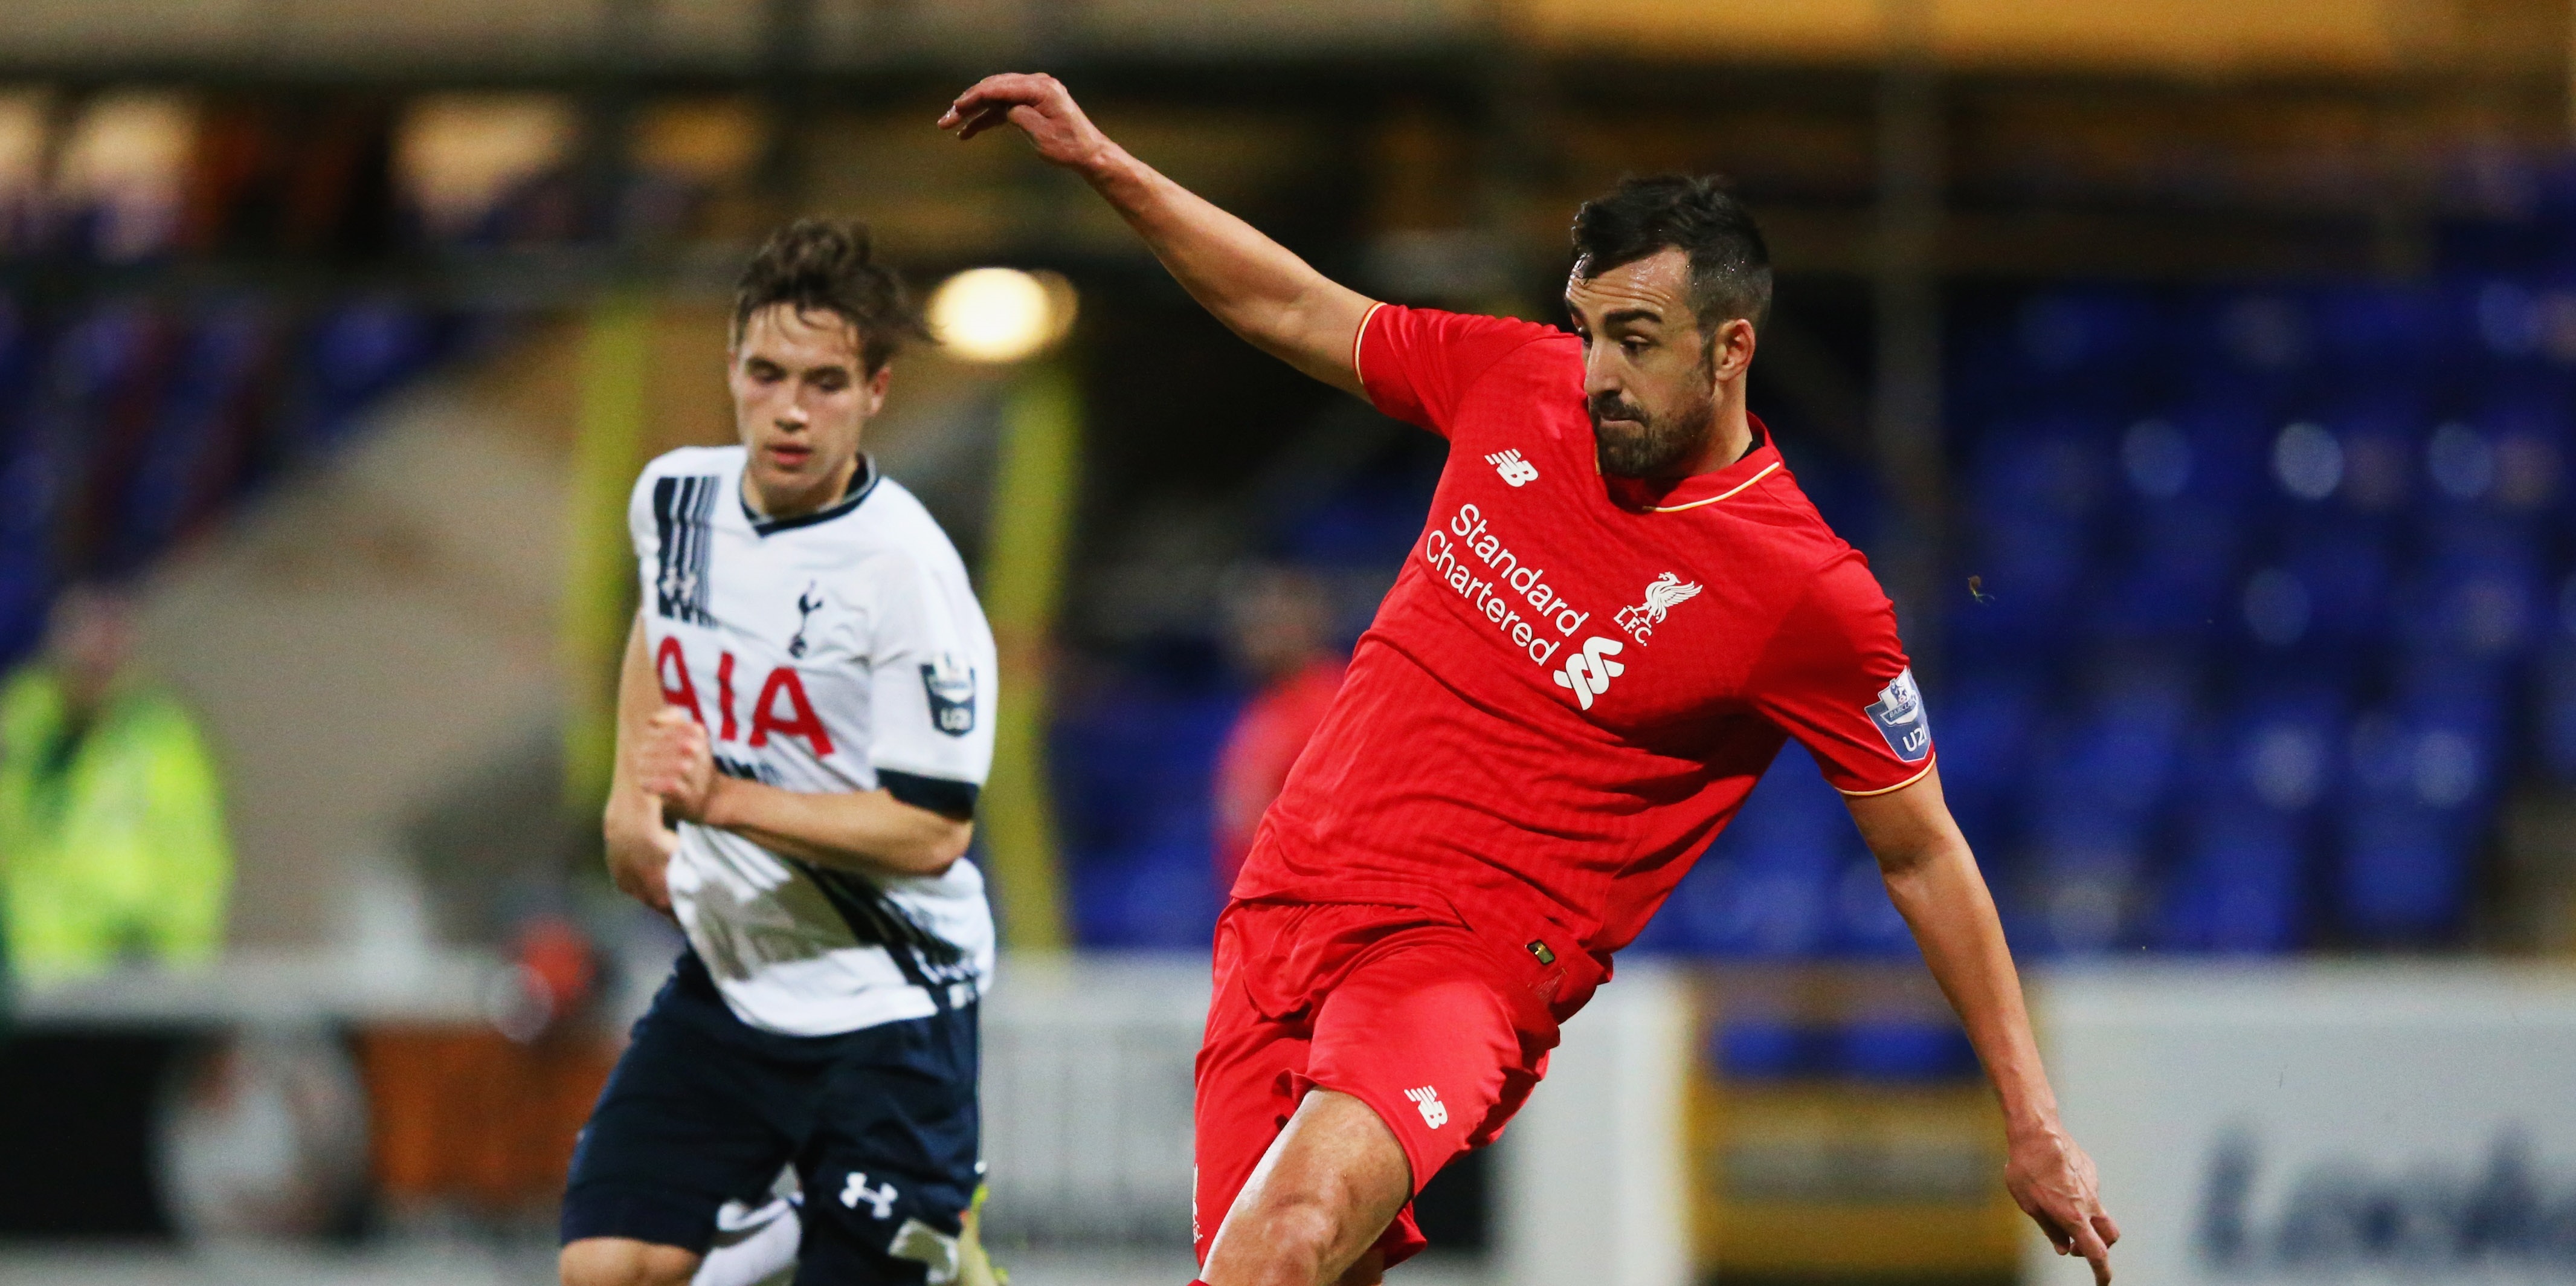 Jose Enrique opens up on the ‘only person’ he’s met with a similar aura to Steven Gerrard